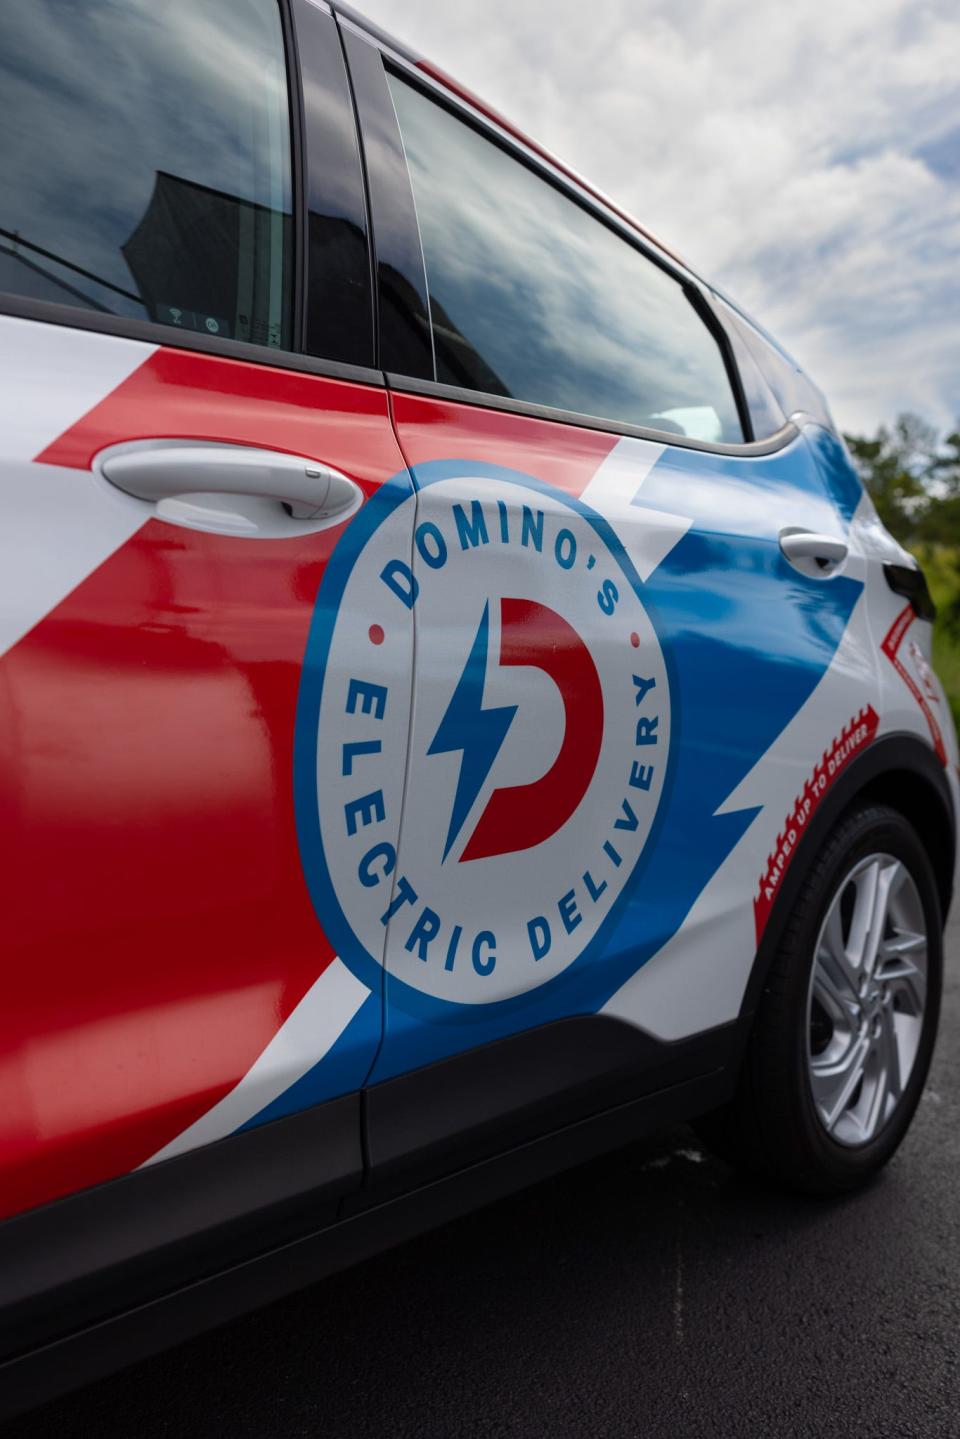 One of the Chevrolet Bolt EVs Domino's Pizza is ordering to use to deliver pizza. The pizza company said it will order more than 800 Bolt EVs for various stores across the United States.